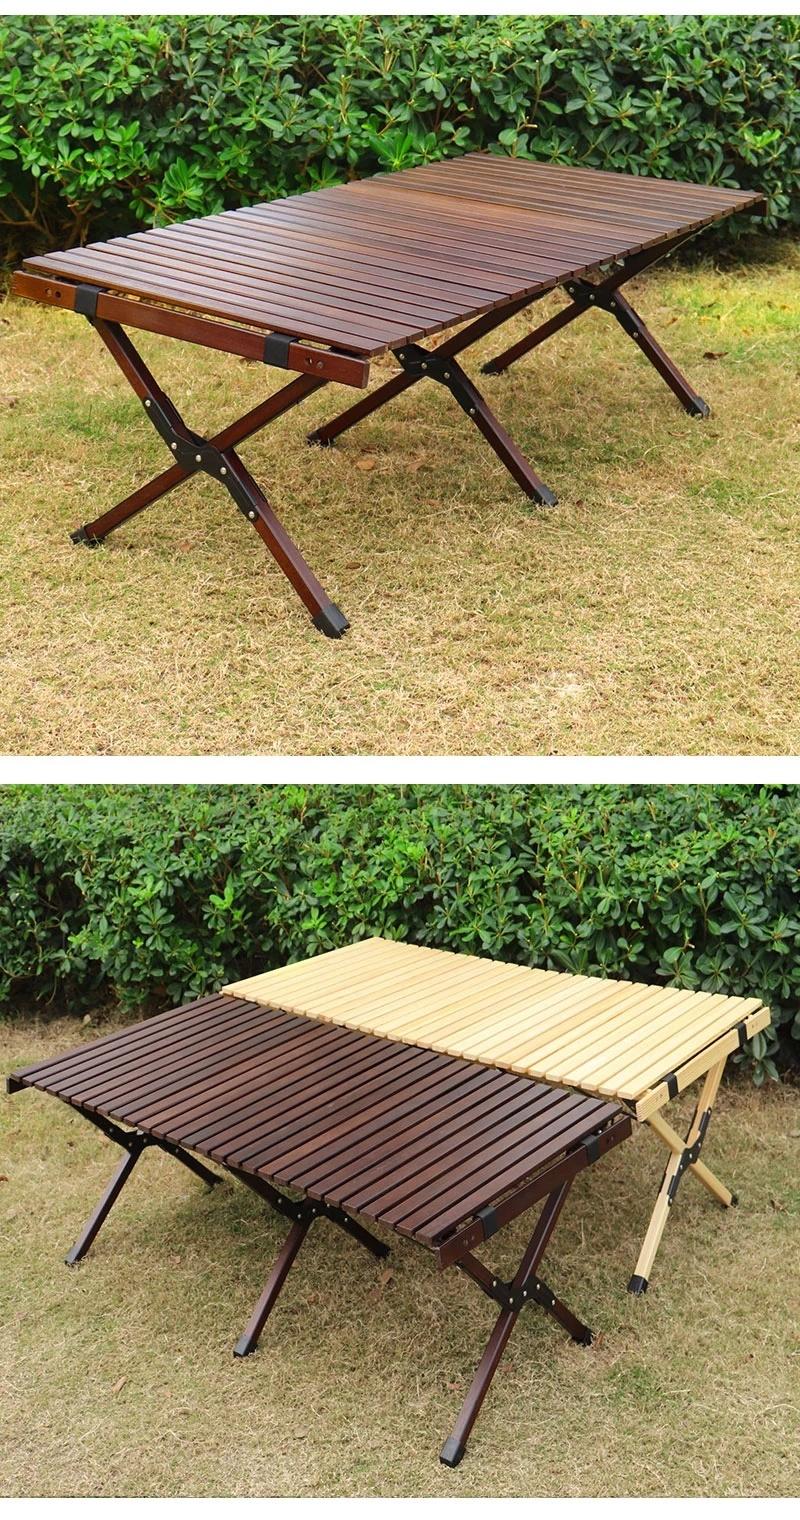 Outdoor Table Beach Table Wooden Table Camping Table Folding Table